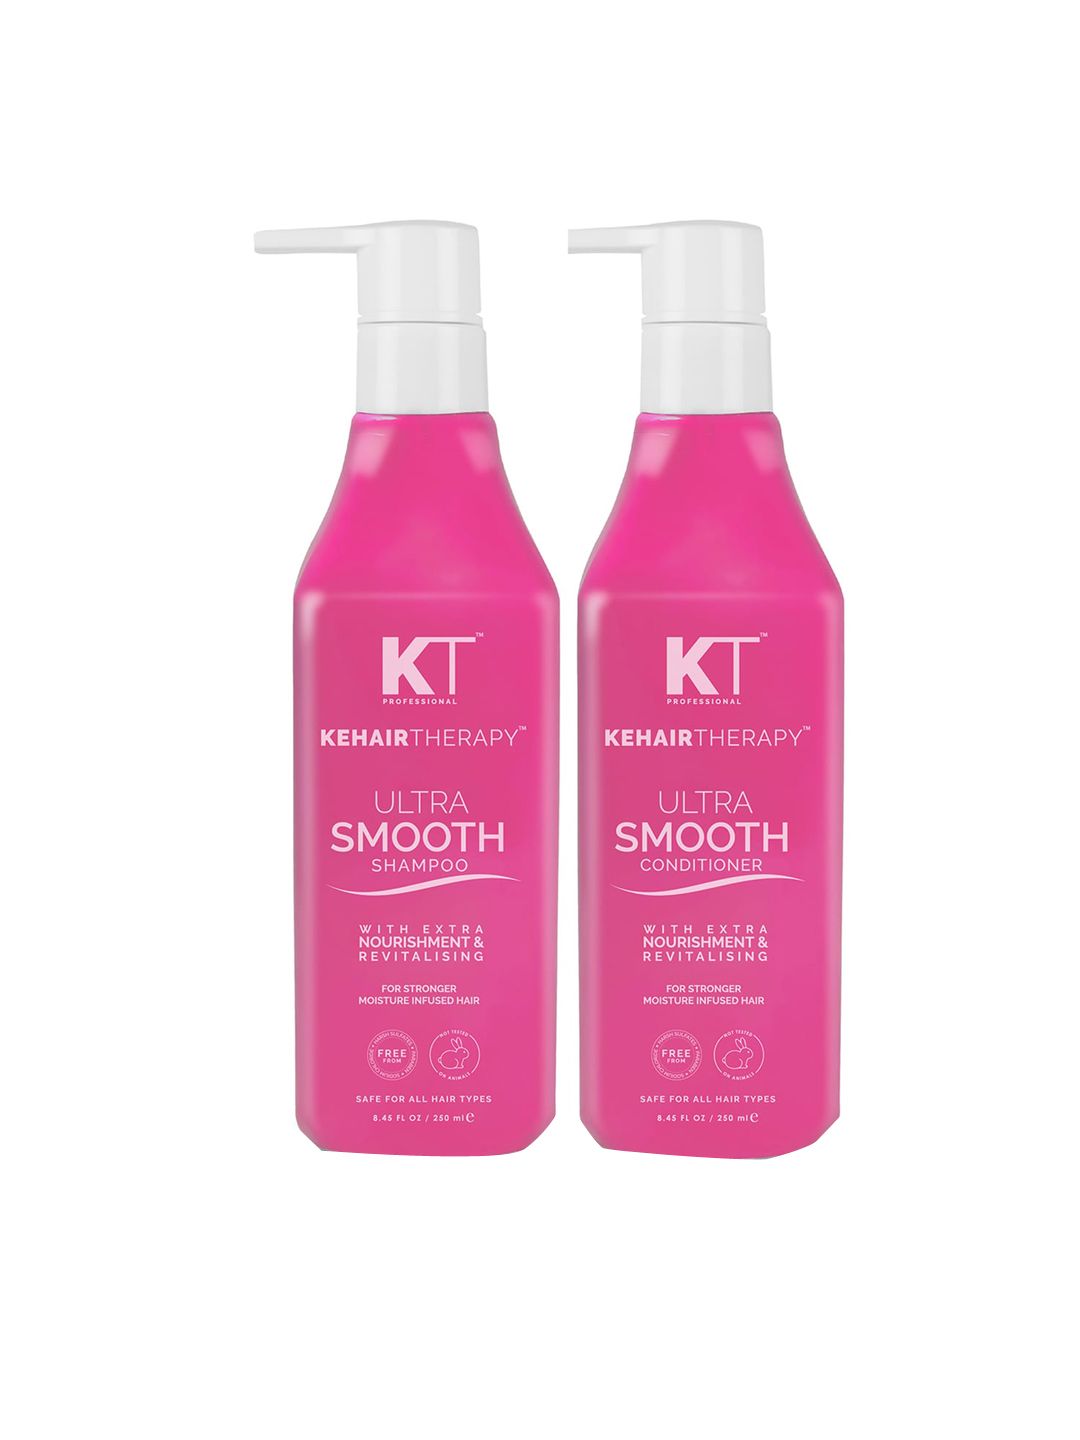 KEHAIRTHERAPY Pack of 2 Ultra Smooth Shampoo and Conditioner Price in India